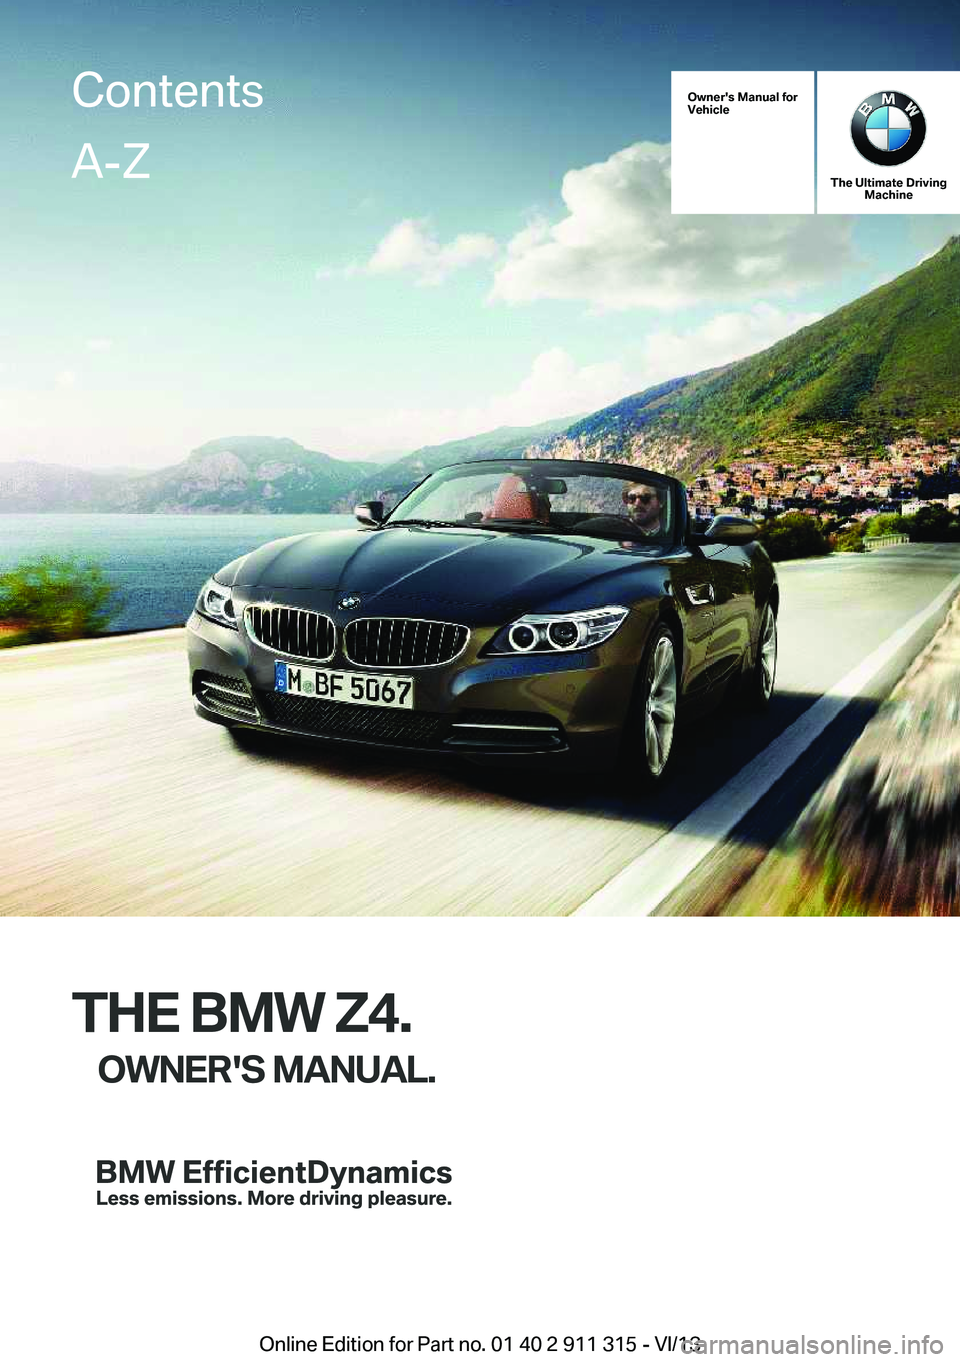 BMW Z4 SDRIVE35IS 2014  Owners Manual Owner's Manual for
Vehicle
The Ultimate Driving Machine
THE BMW Z4.
OWNER'S MANUAL.
ContentsA-Z
Online Edition for Part no. 01 40 2 911 315 - VI/13   